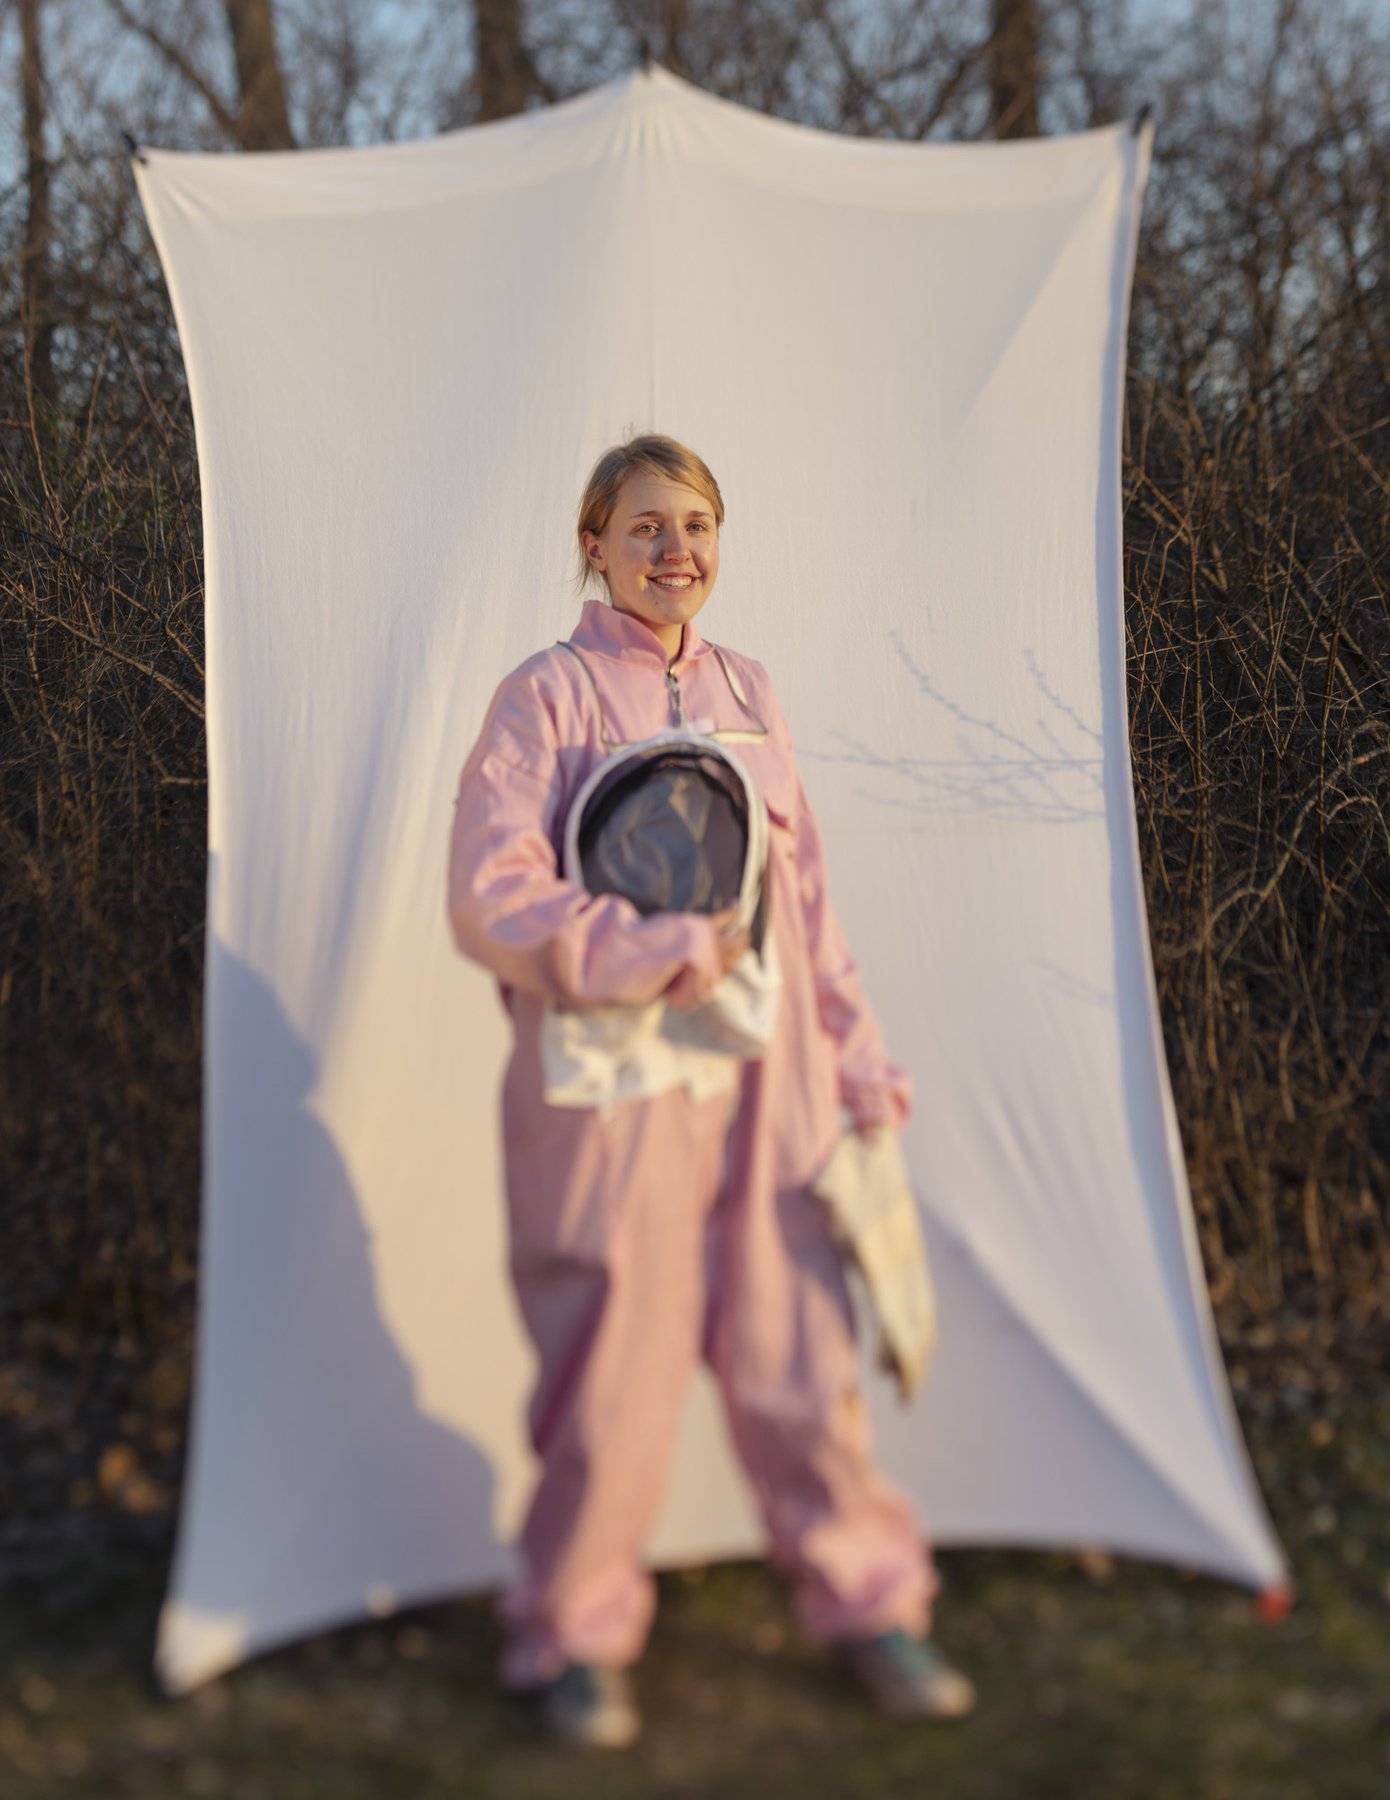  RIT beekeeping club president, Emma Eagen, poses for a portrait nearby the hives at Rochester Institute of Technology in Rochester N.Y. on April 4, 2021. Eagen is a third-year international and global studies major on the pre-med track. The image wa